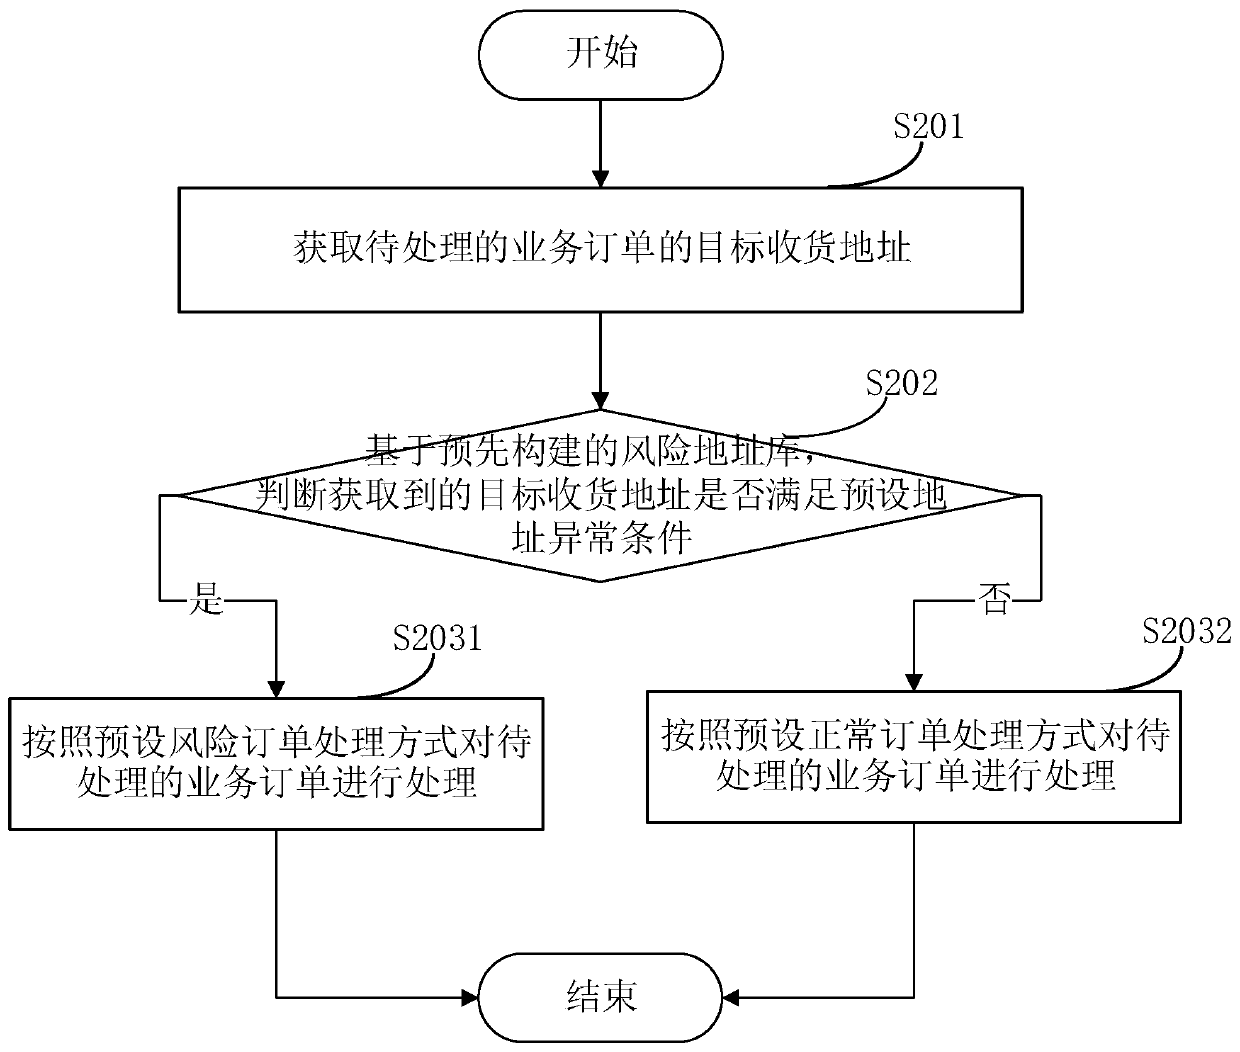 Service order processing method and device